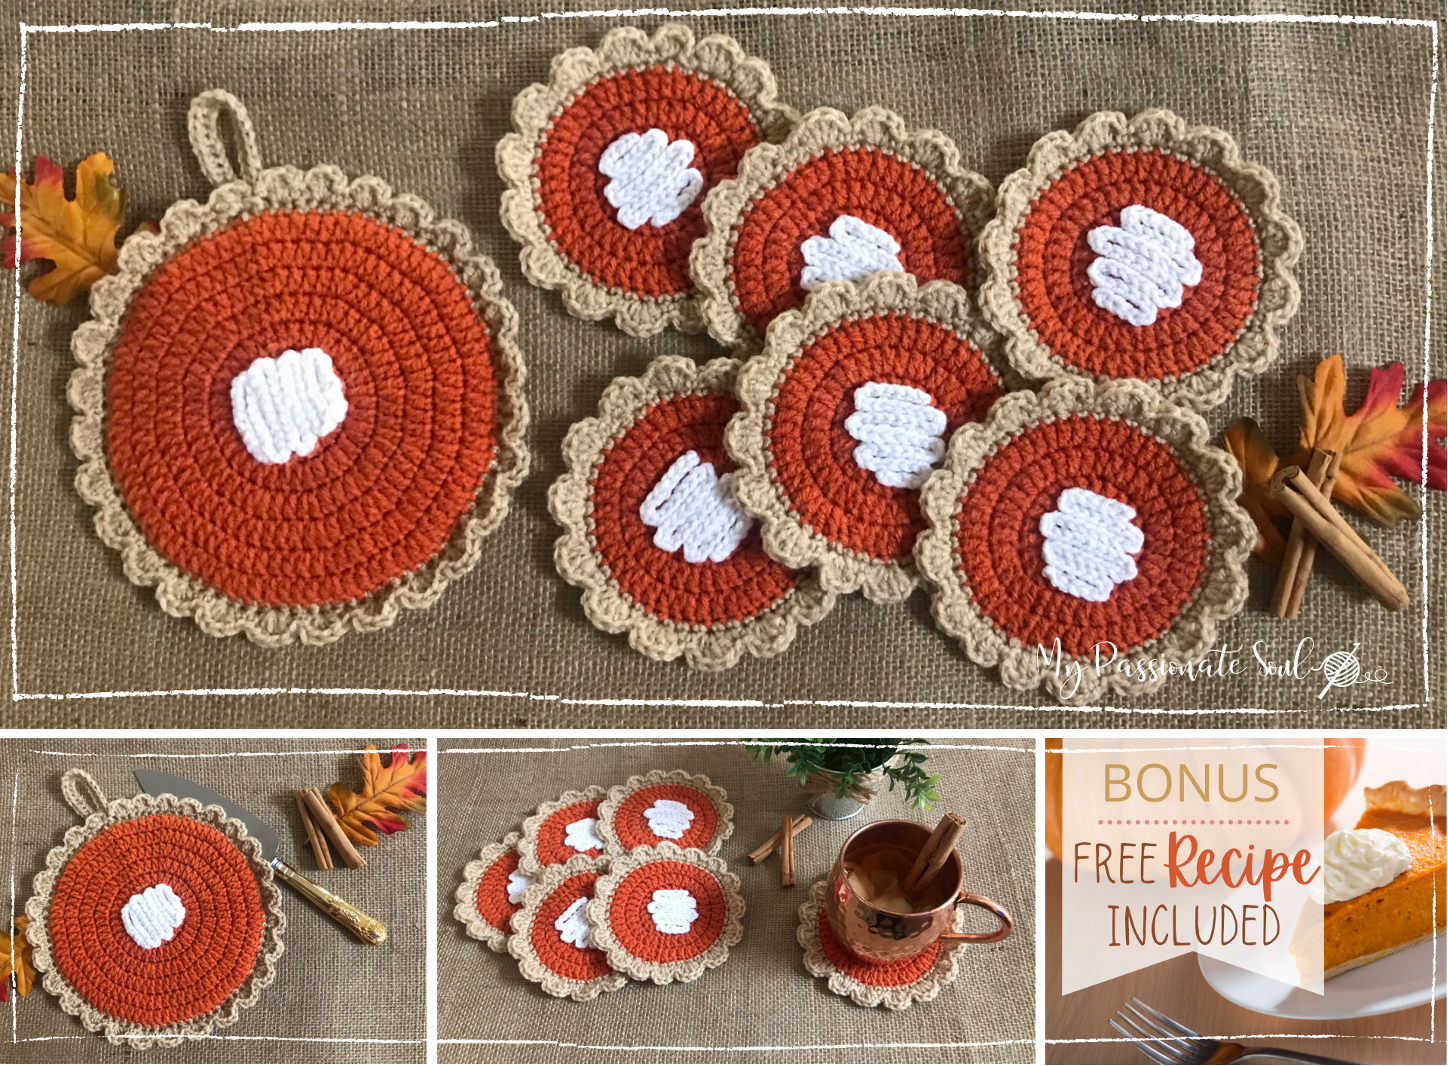 Crochet Double Layered Bowl Cozy - My Passionate Soul